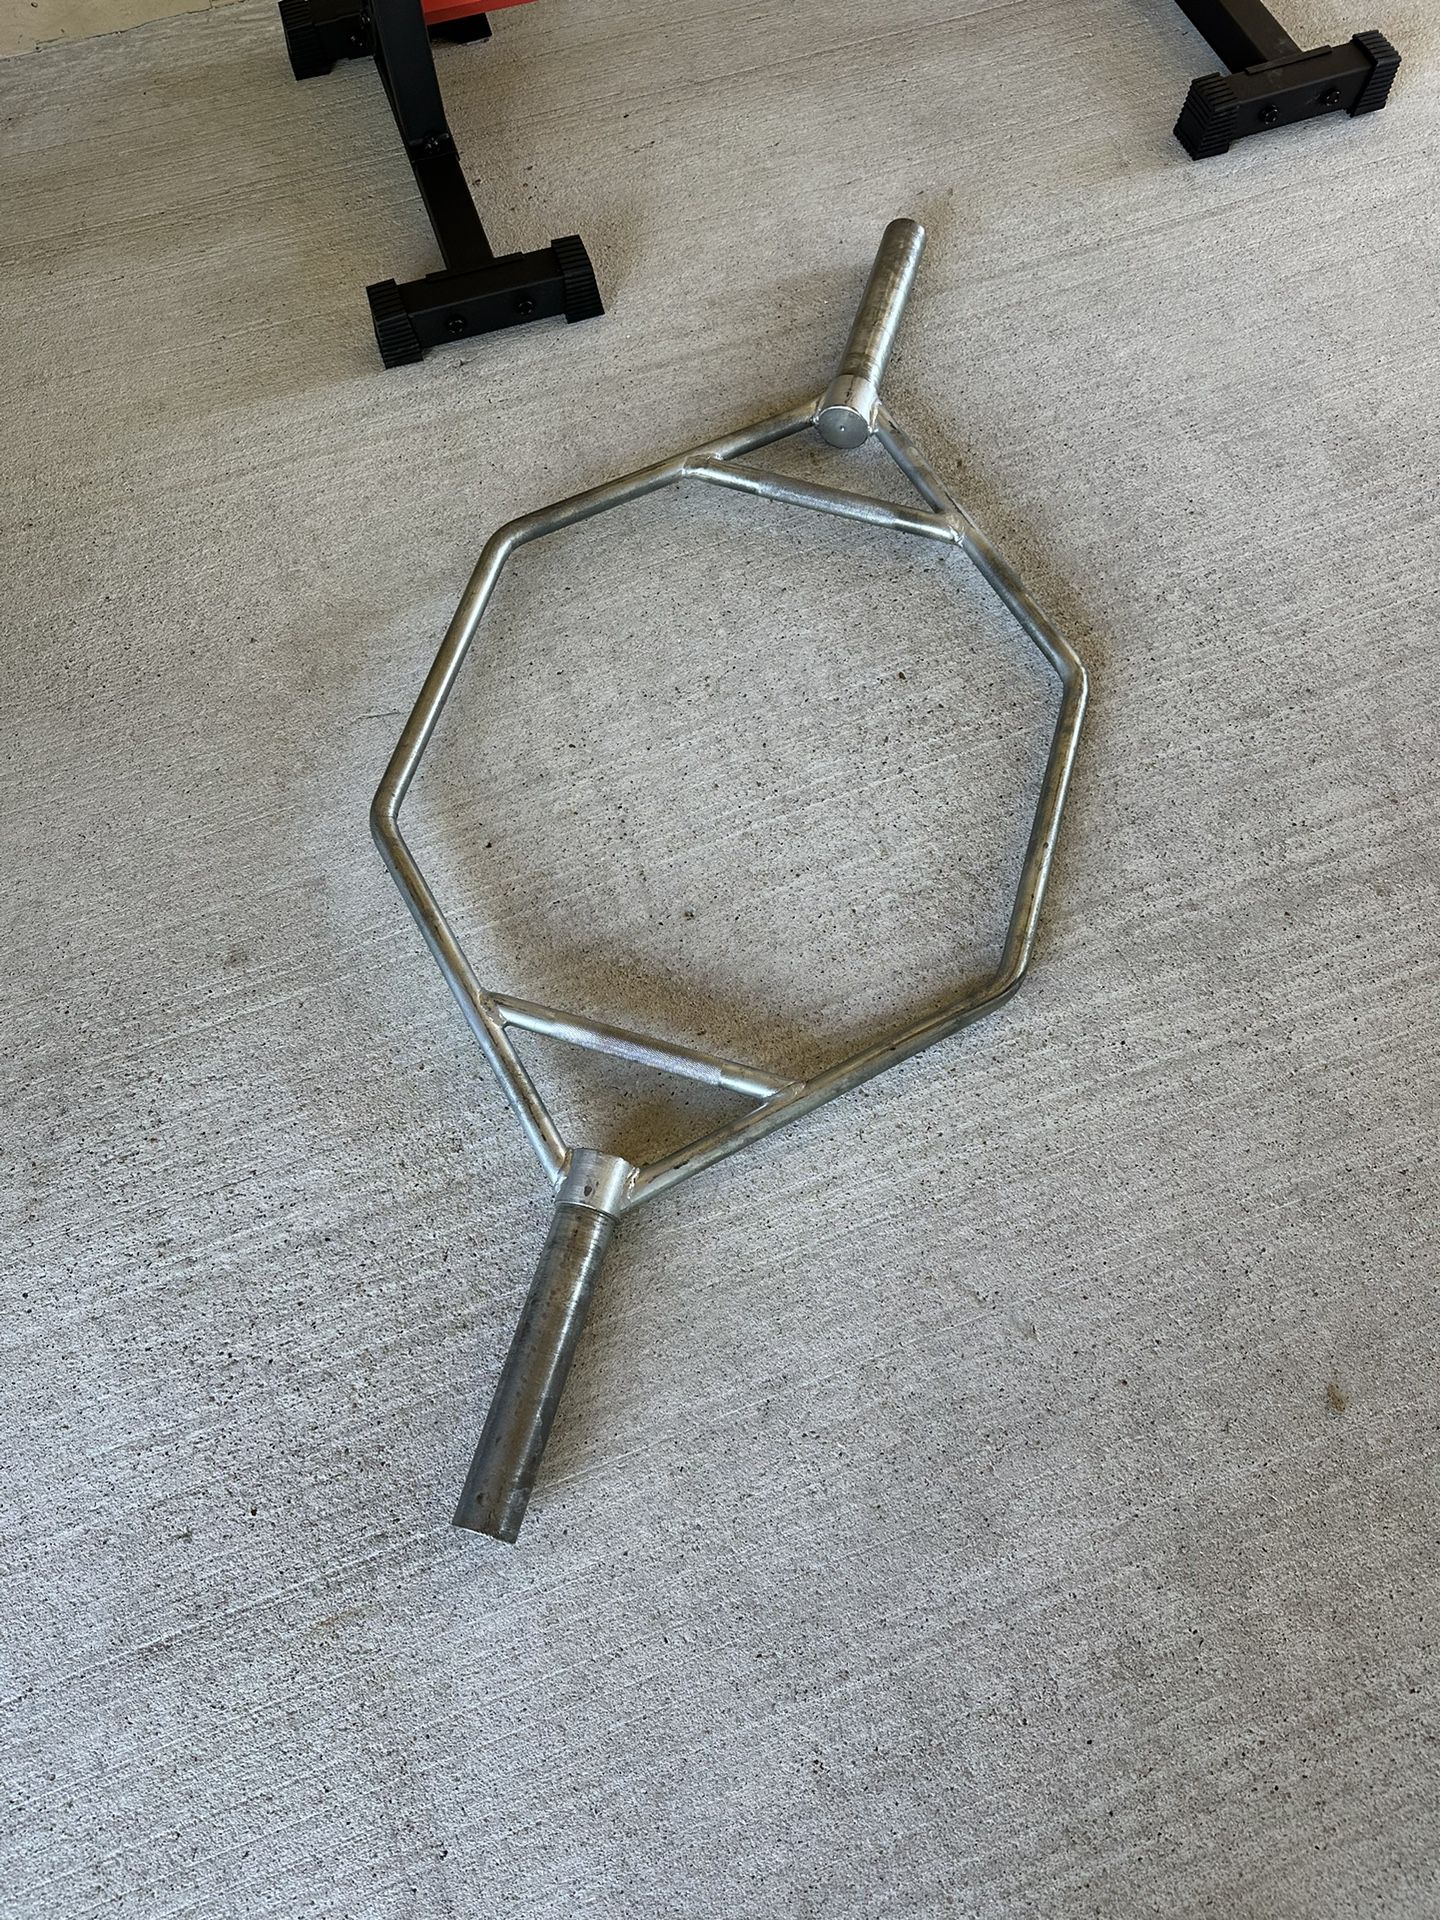 CAP solid Barbell Olympic Trap Bar $80 